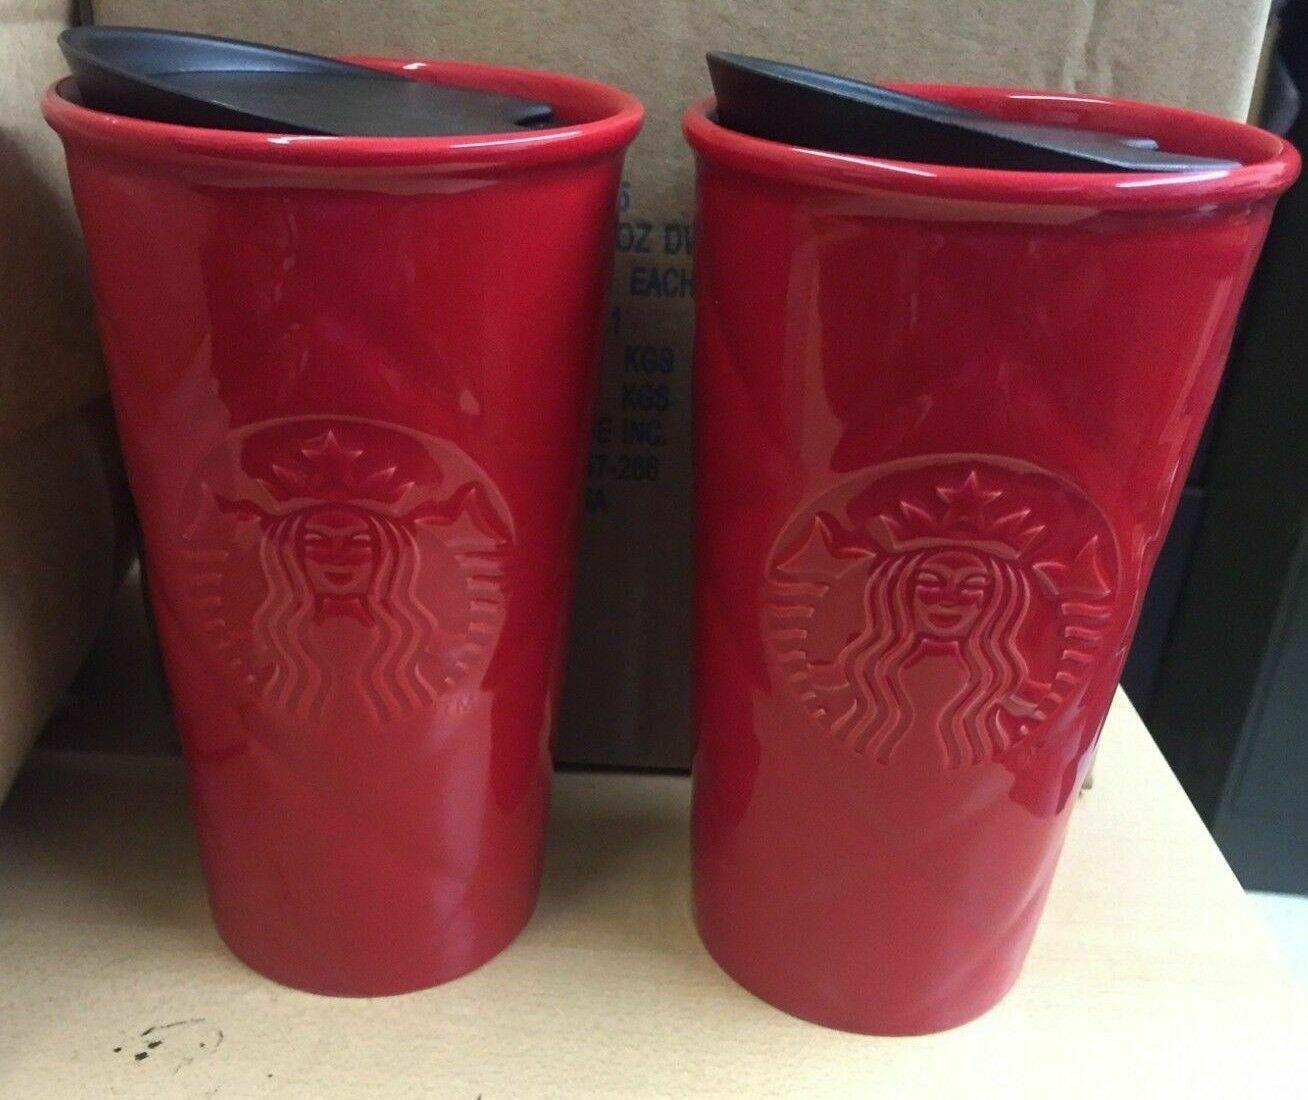 2 NEW Starbucks Red Quilted Double Wall Ceramic Travel Mug TUMBLER 